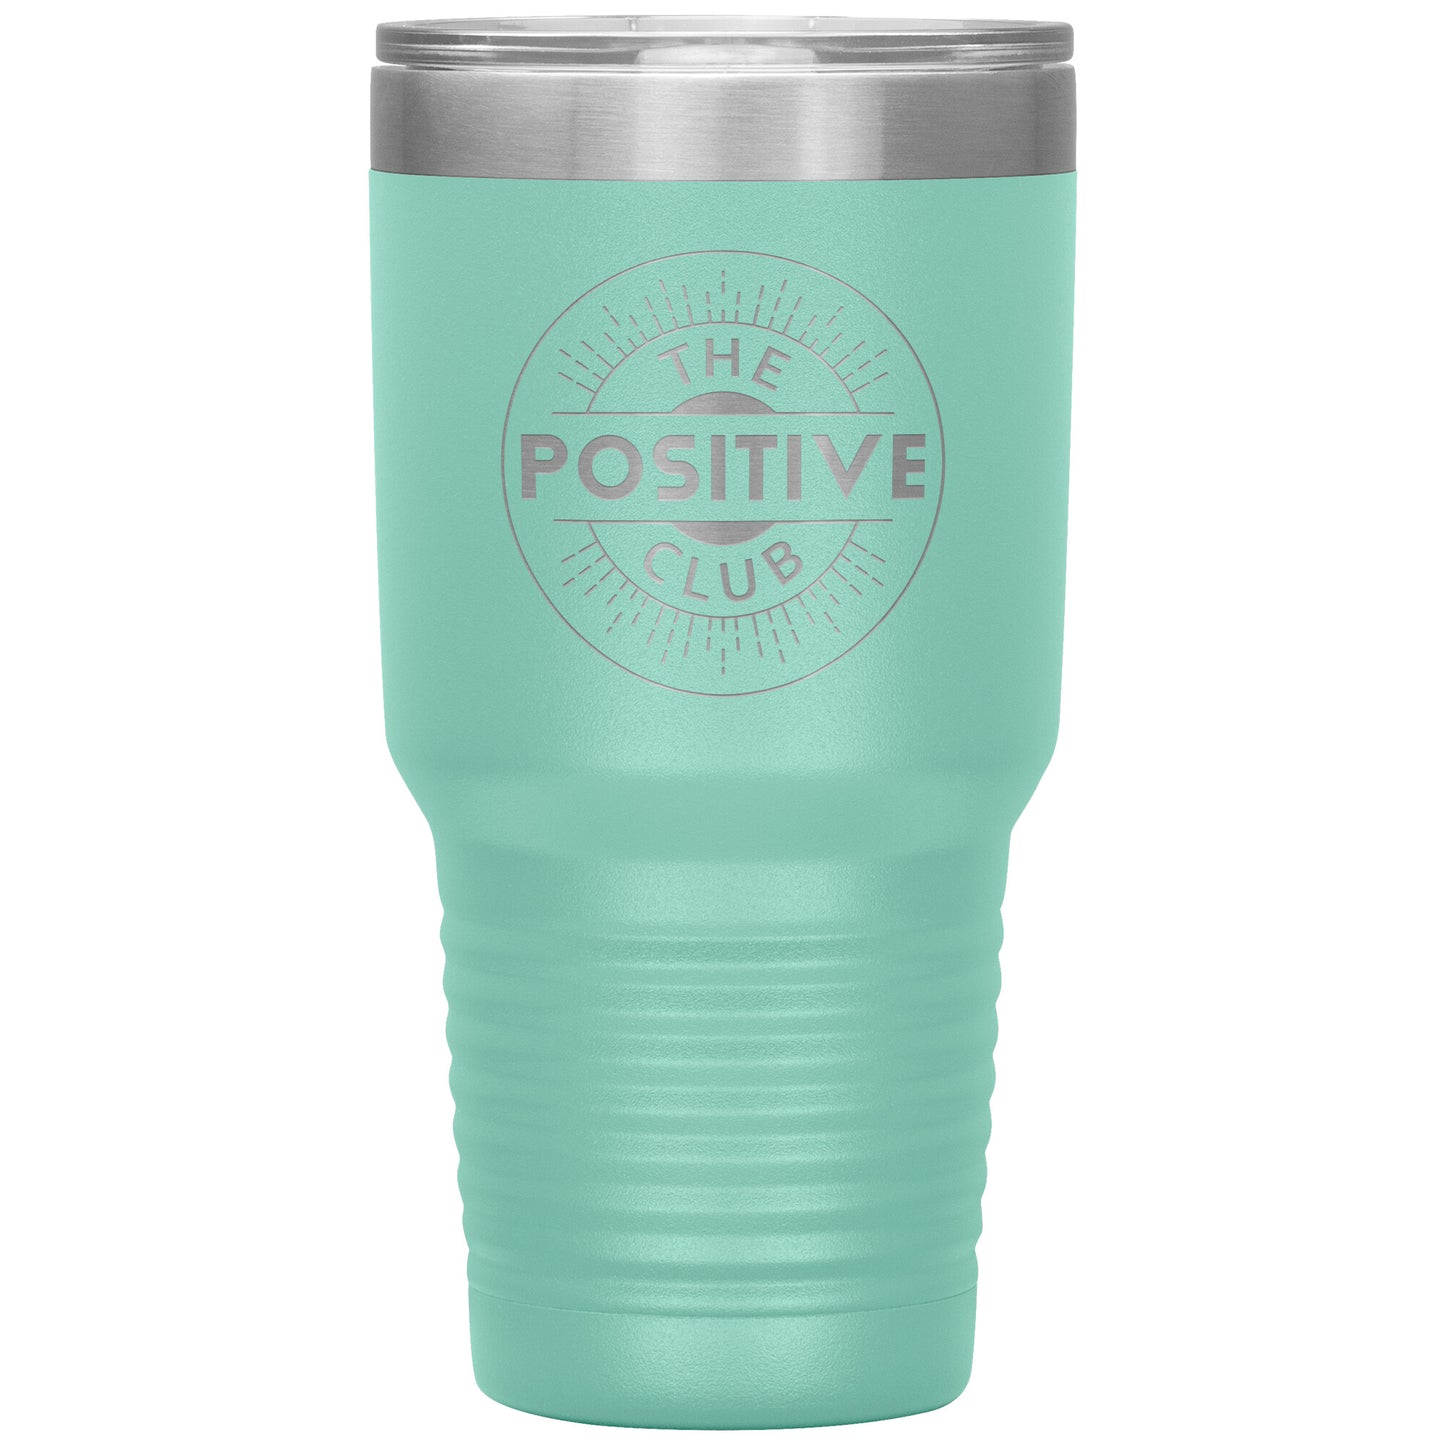 30oz Insulated Tumbler The Positive Club ( Free Shipping )